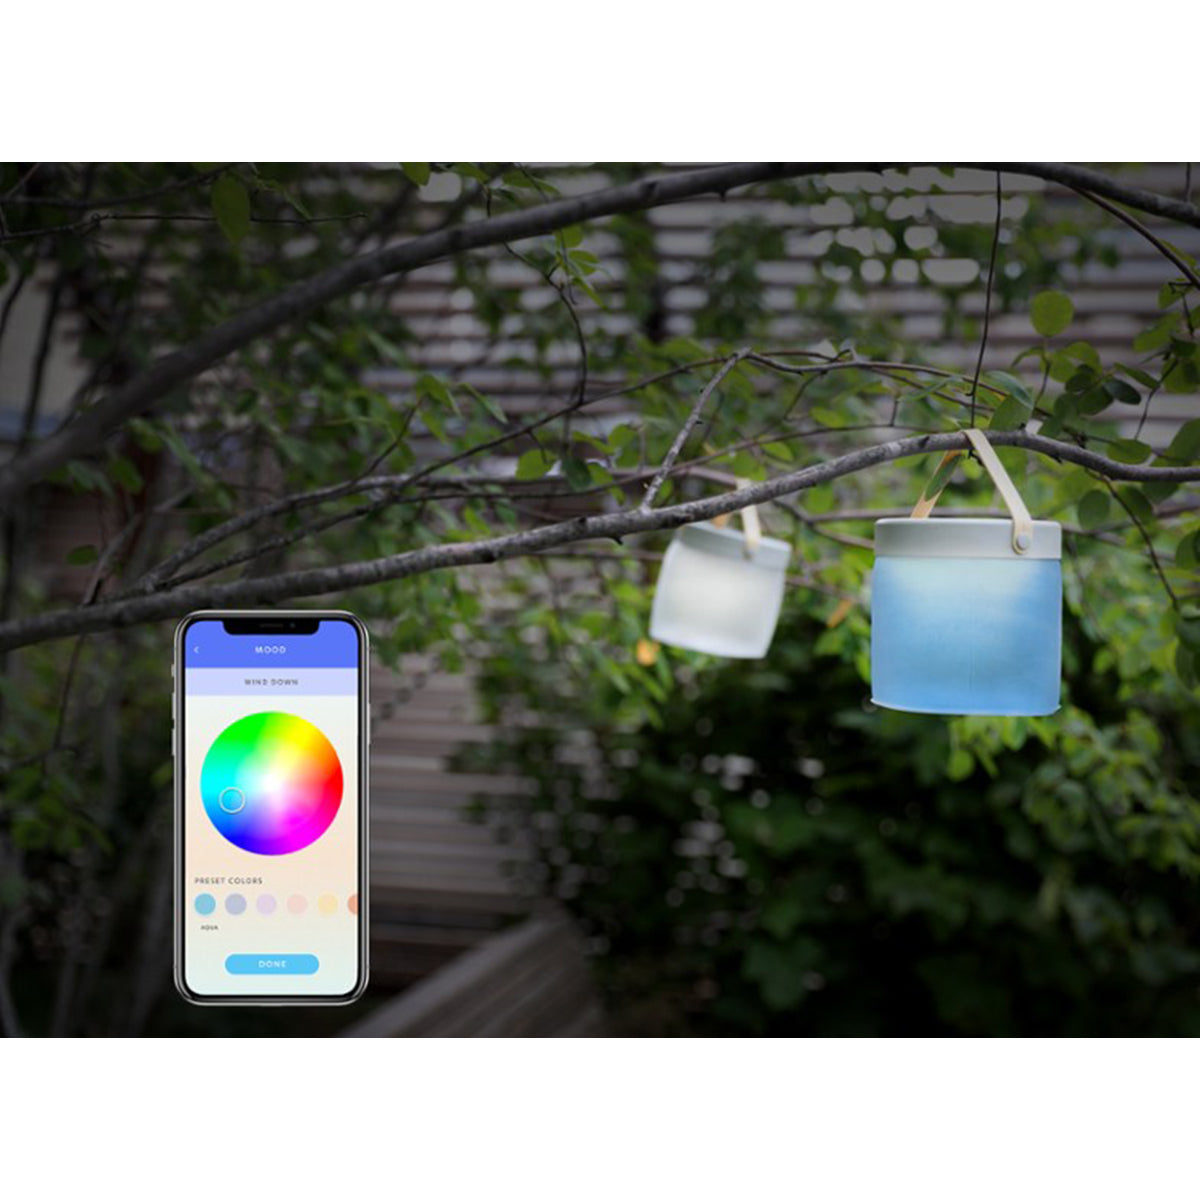 MPOWERD Luci Inflatable Smart Solar Light with Mobile Charger MPOWERD